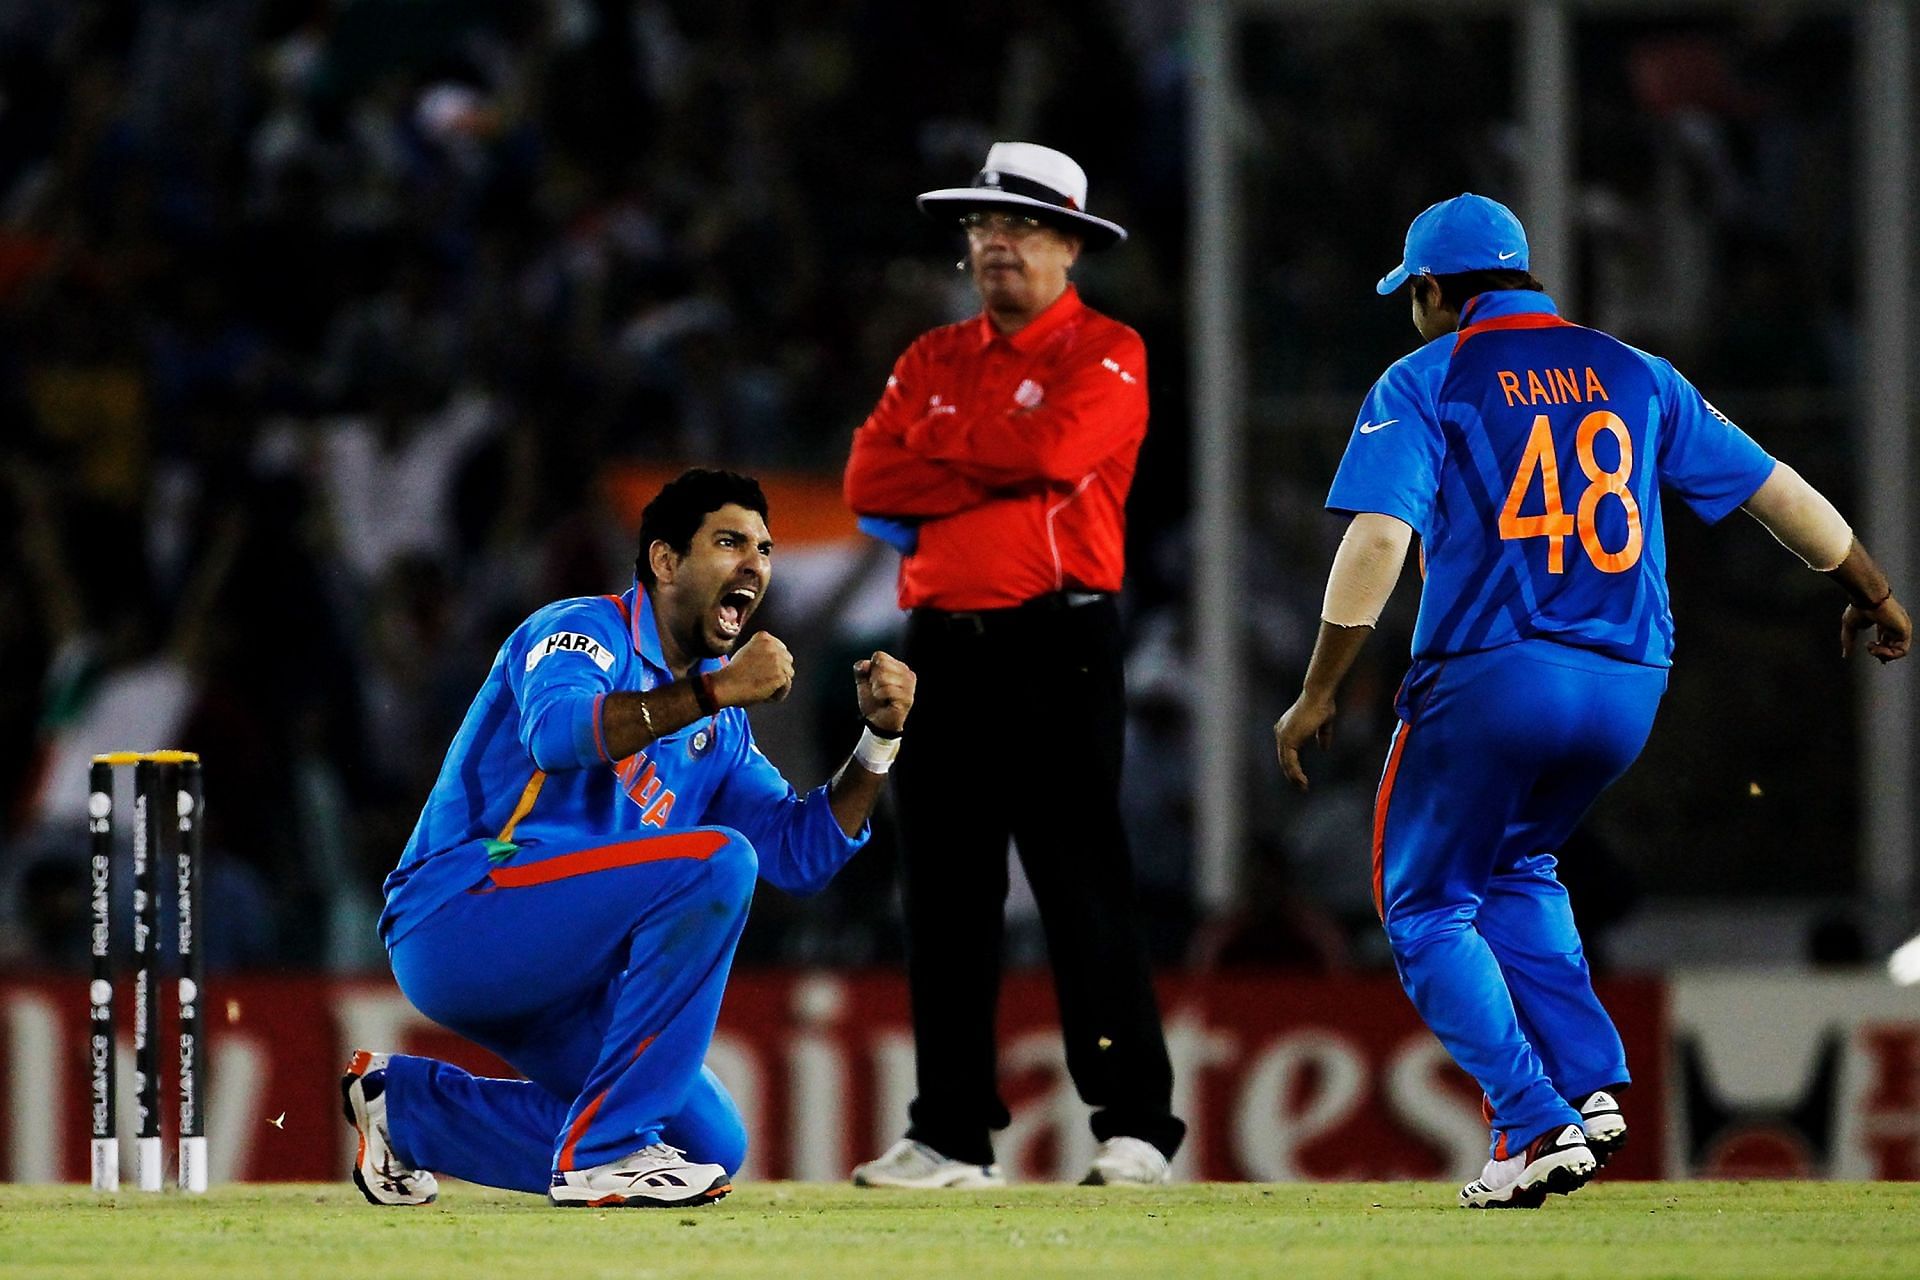 Players like Yuvraj Singh and Suresh Raina can make the Legends League T20 competition more exciting (Image: Getty)